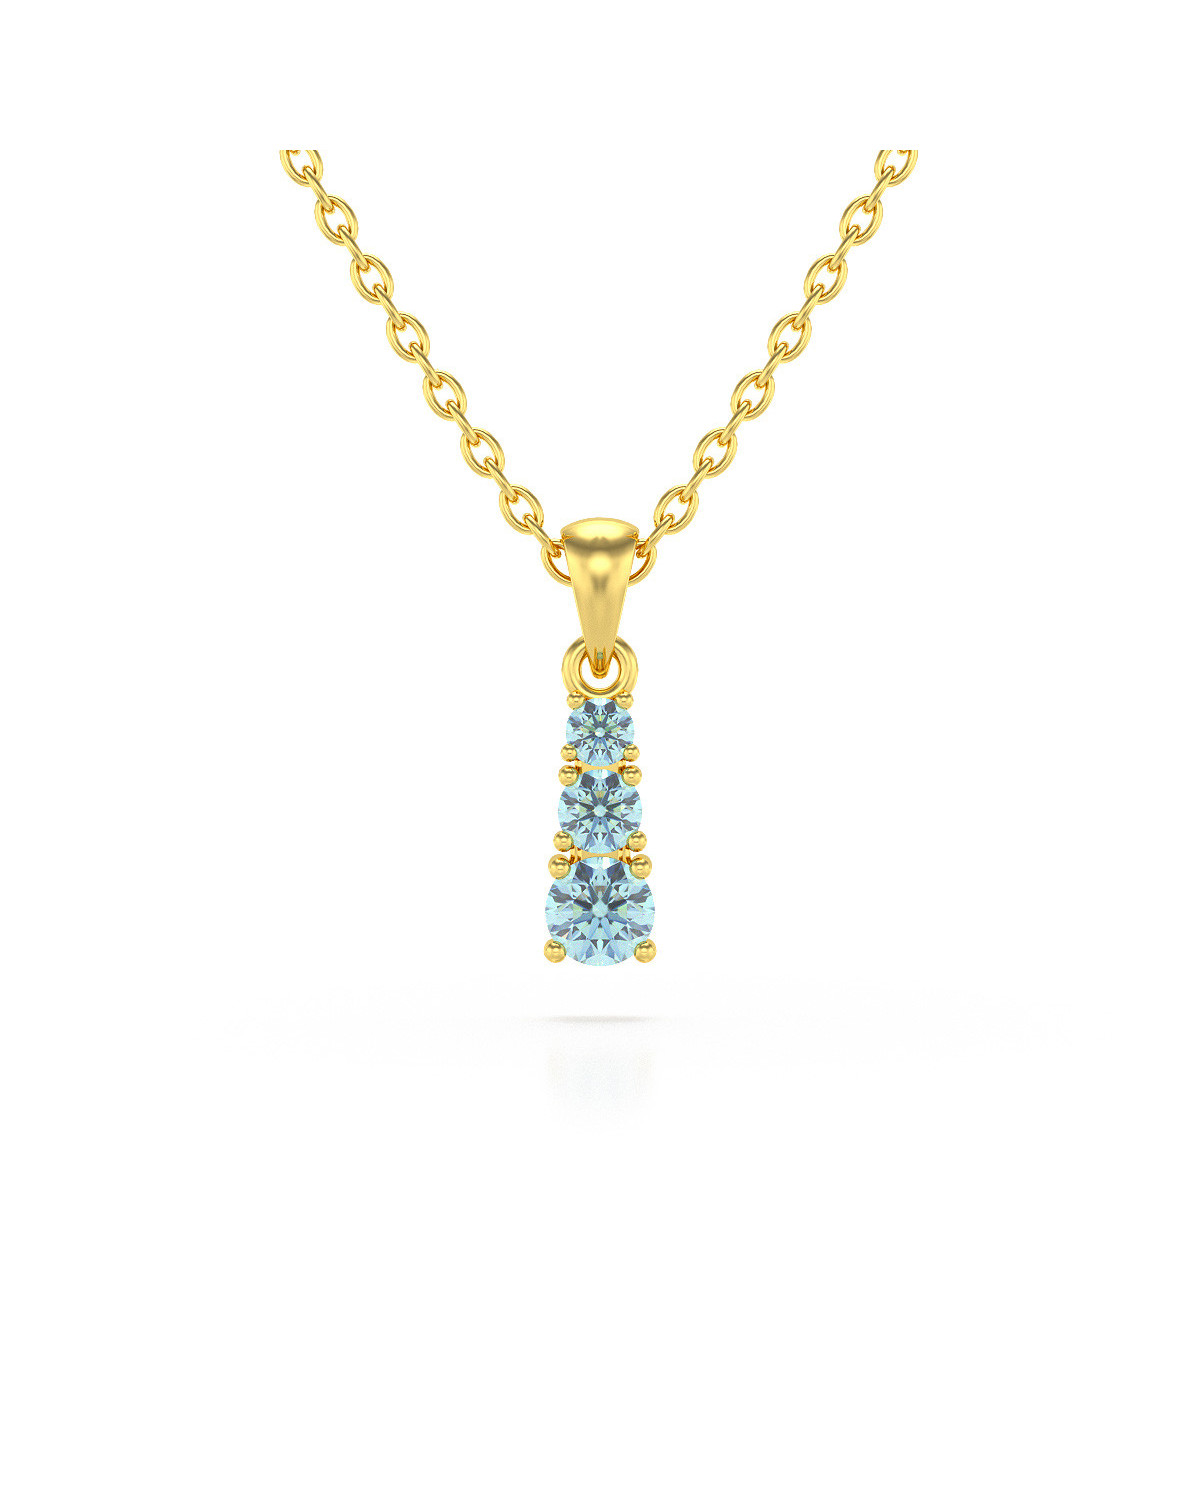 14K Gold Aquamarine Necklace Pendant Gold Chain included